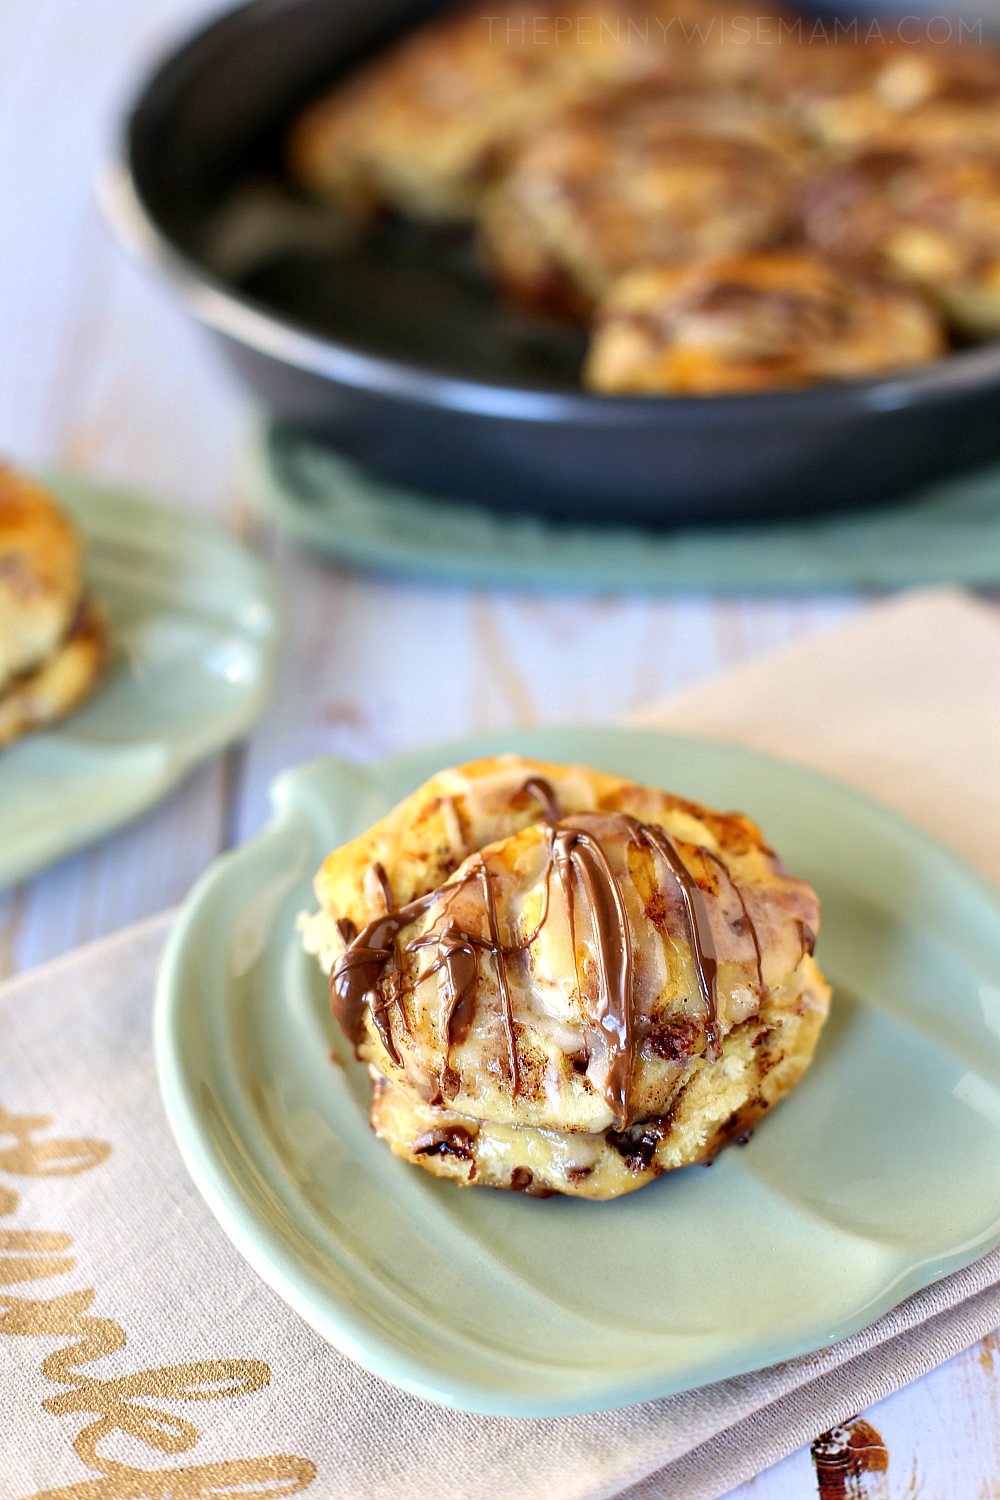 Easy Chocolate Hazelnut Cinnamon Rolls - simple and delicious recipe that takes less than 20 mins!